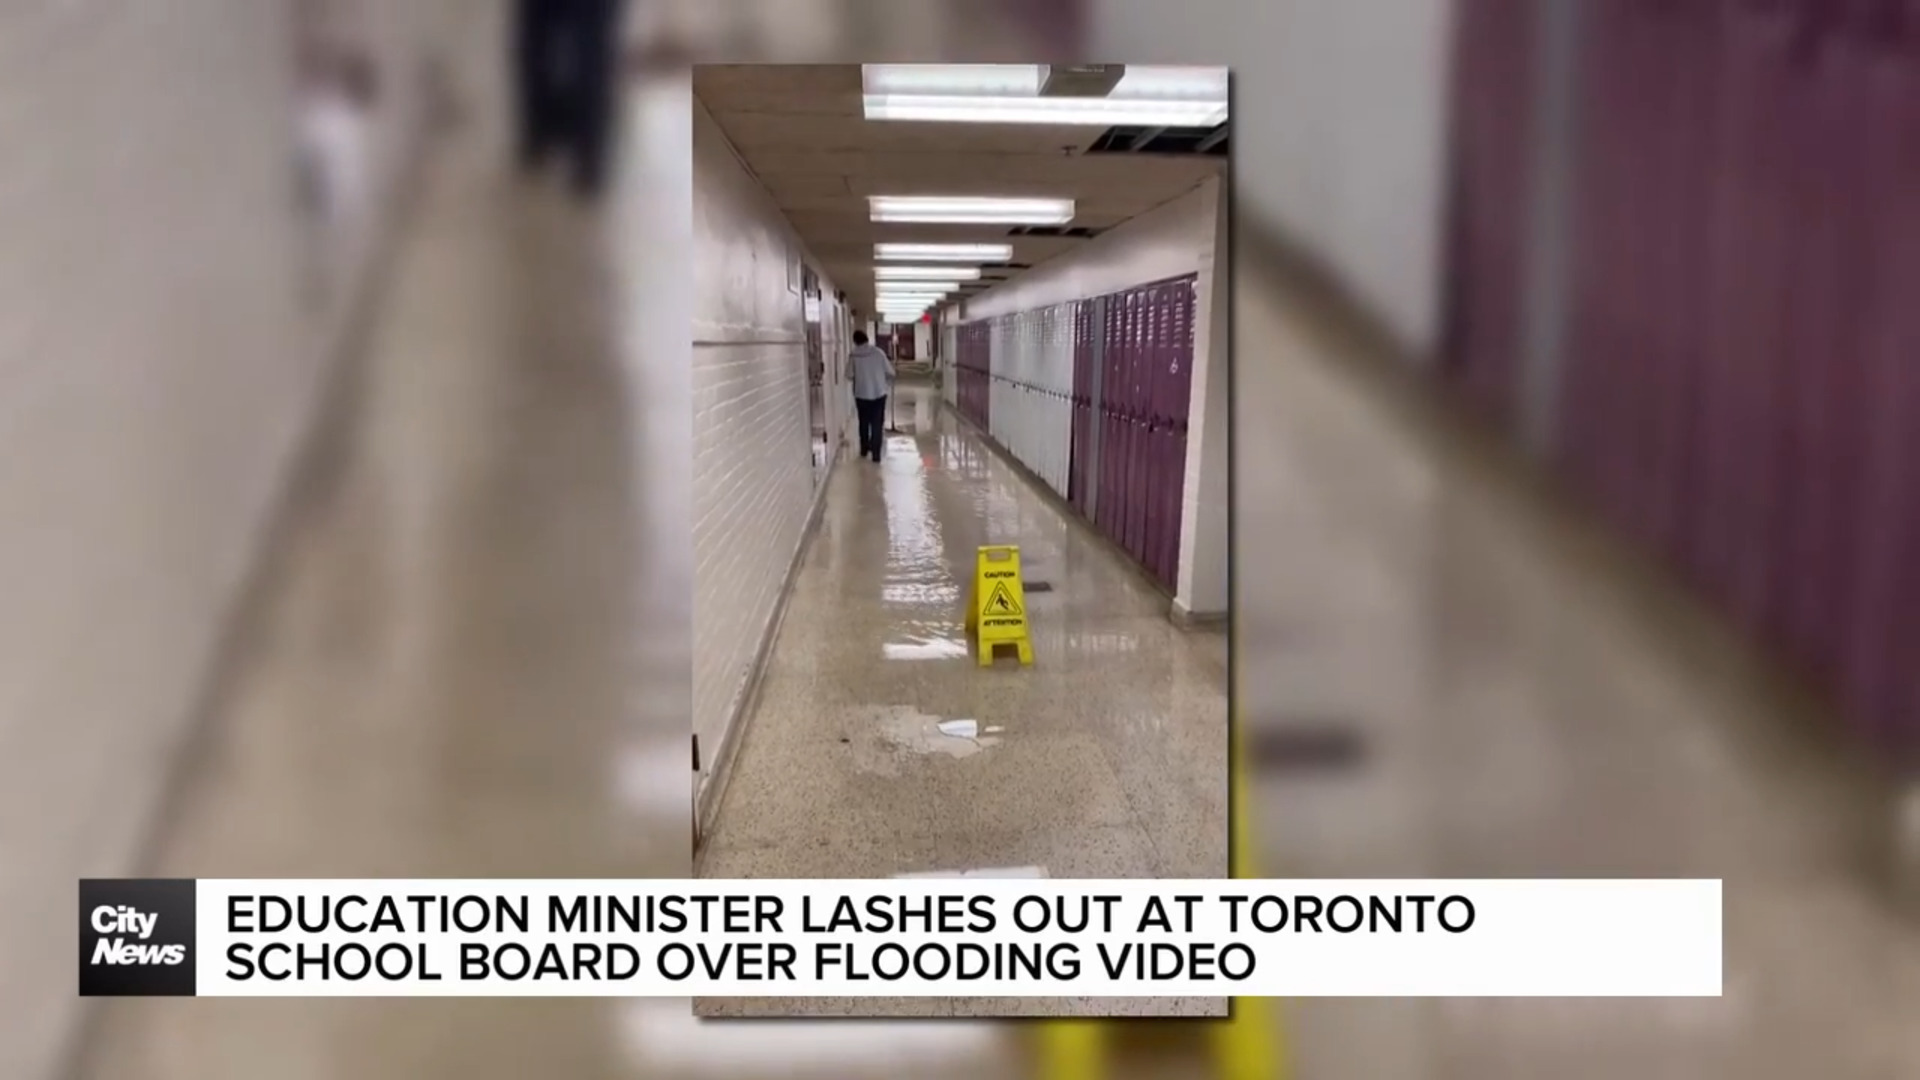 Education Minister lashes out at Toronto school board over repair backlogs